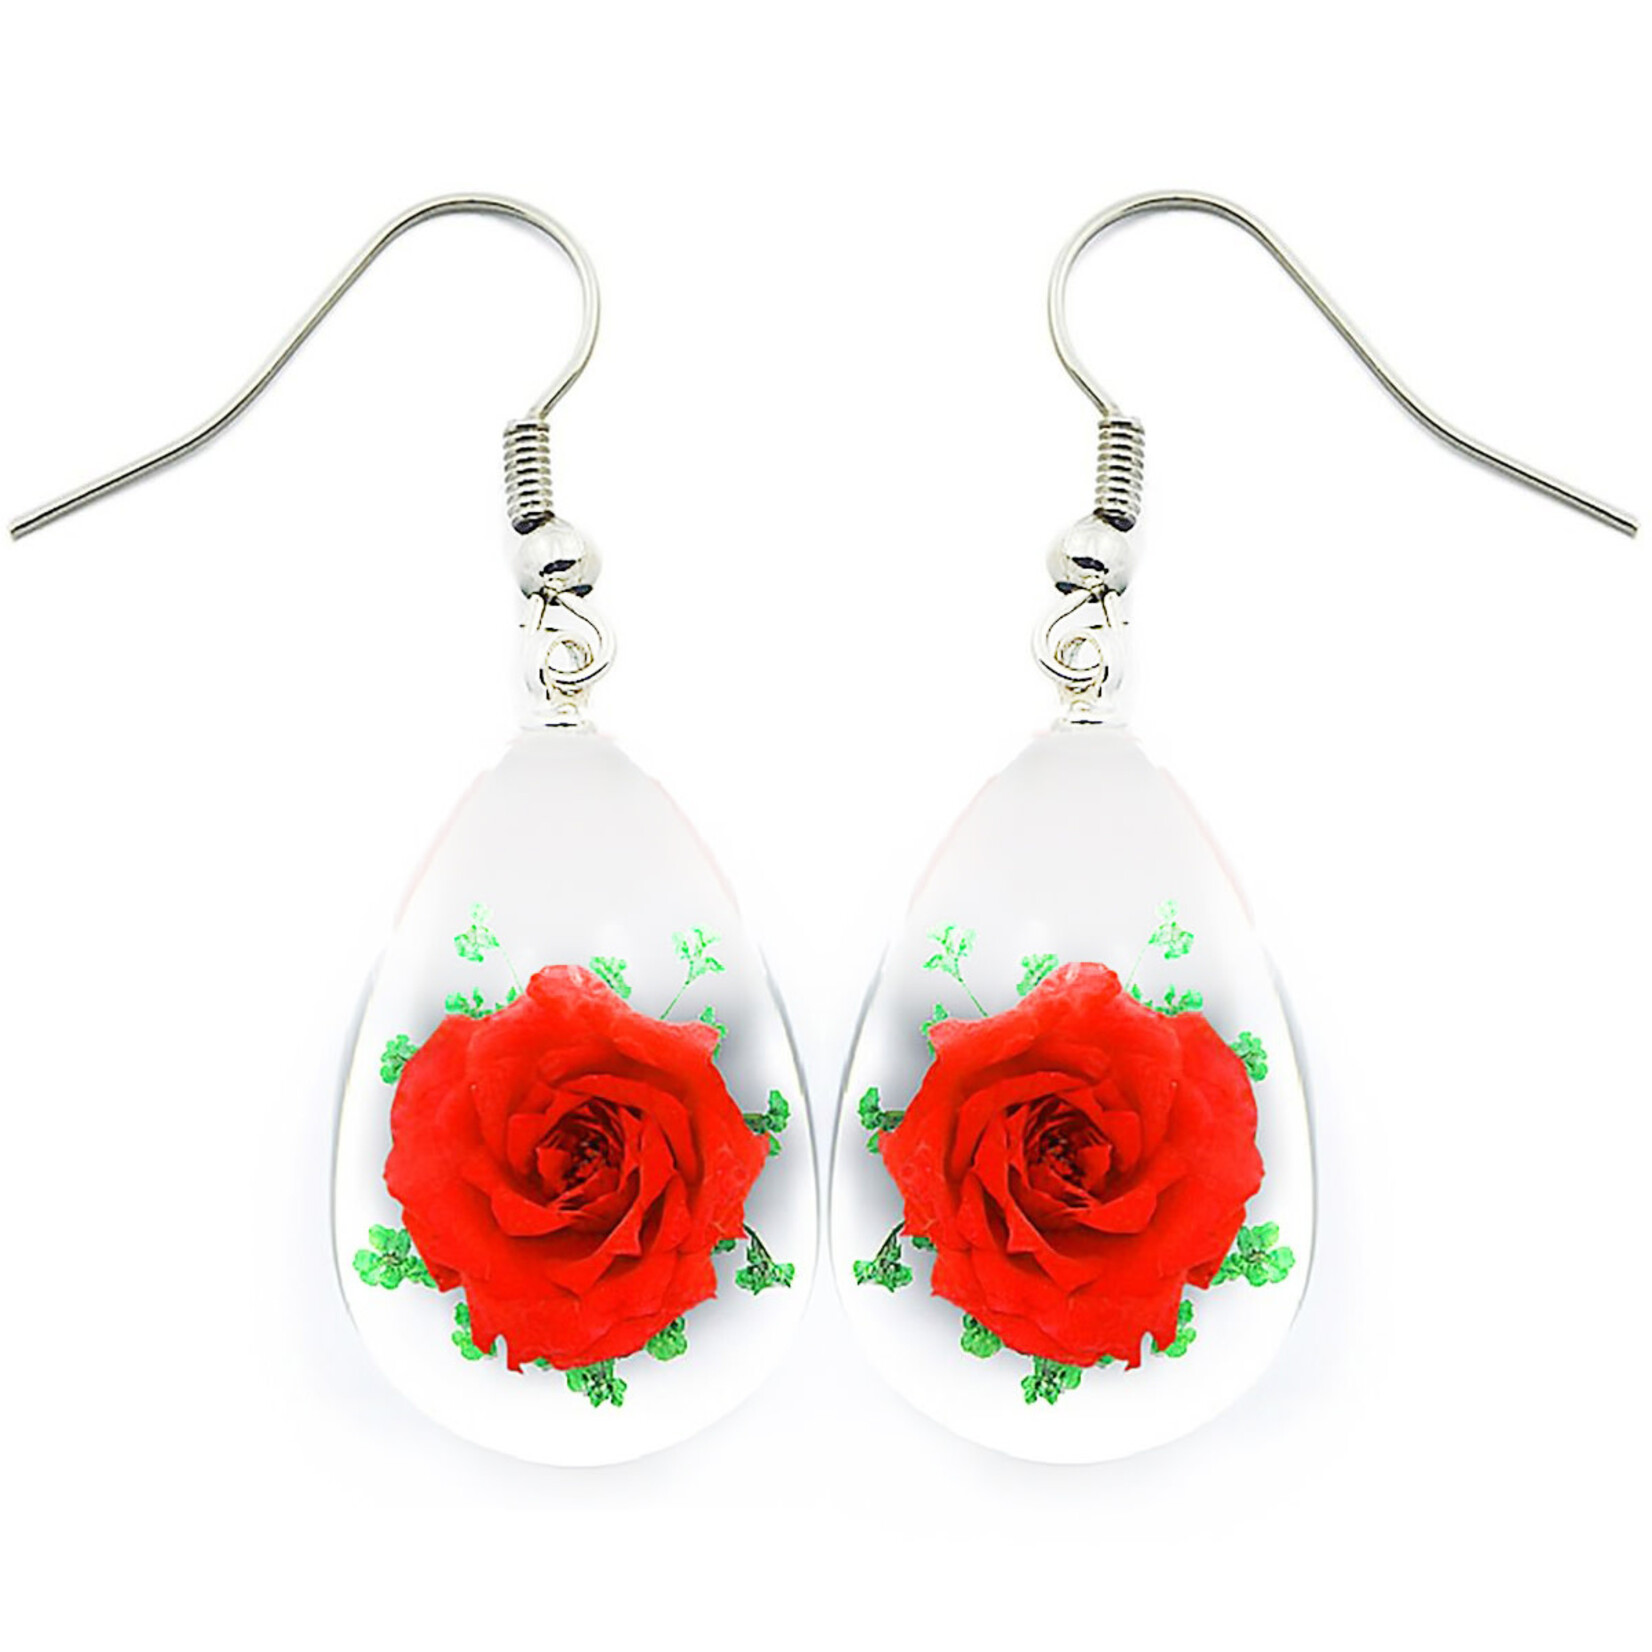 BicBugs Real Preserved Flower Earrings Clear - Red/Green Rose